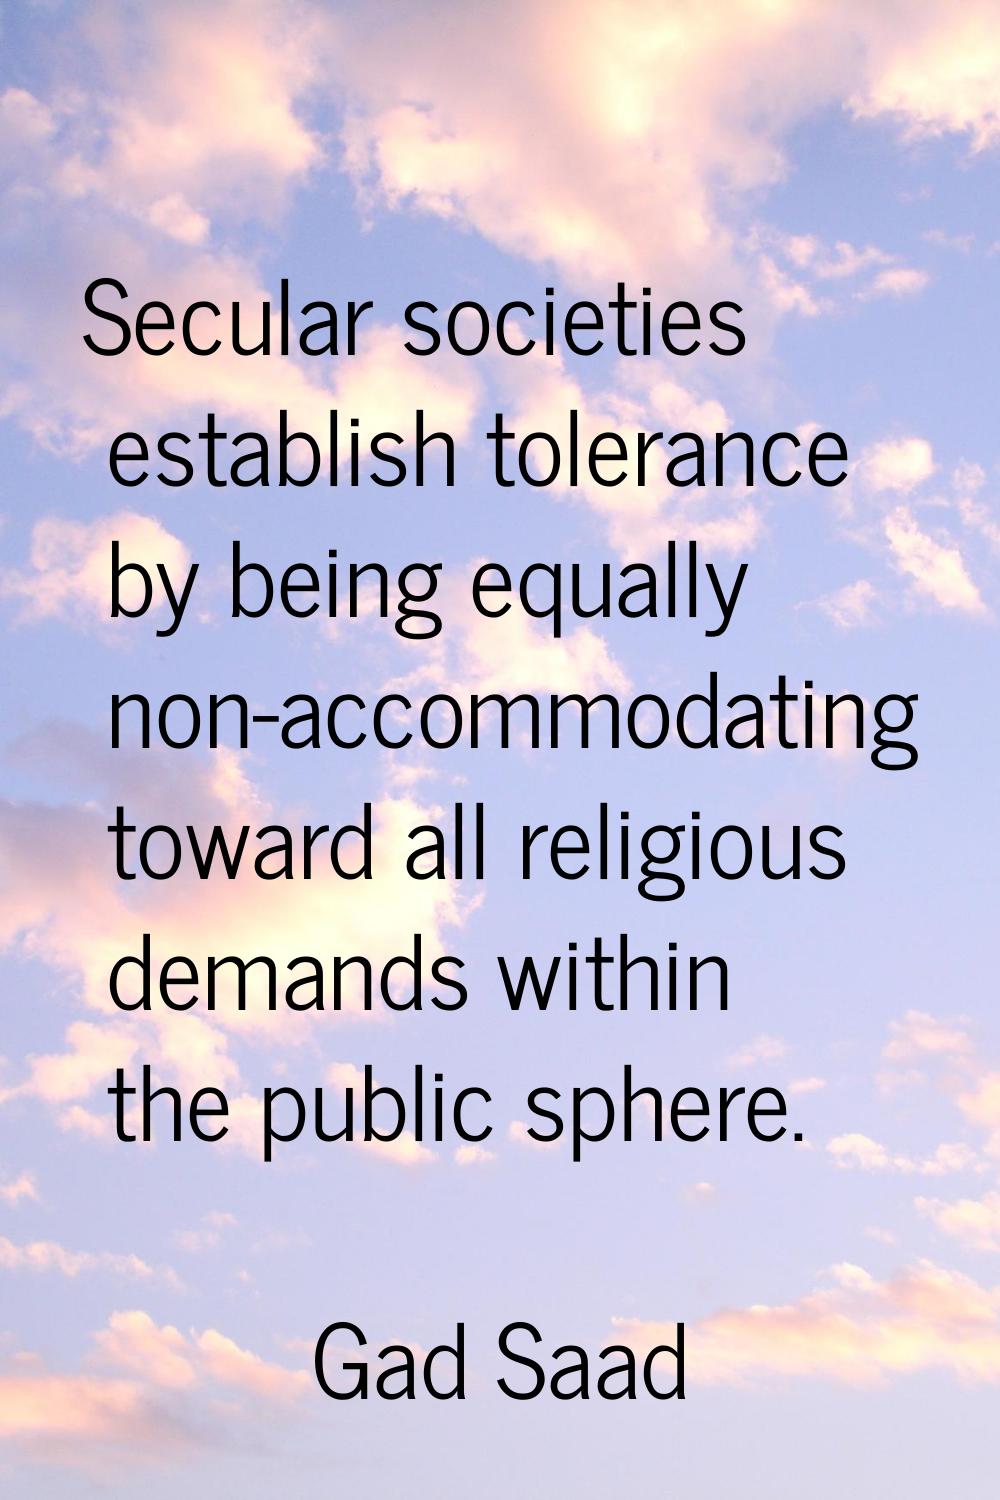 Secular societies establish tolerance by being equally non-accommodating toward all religious deman